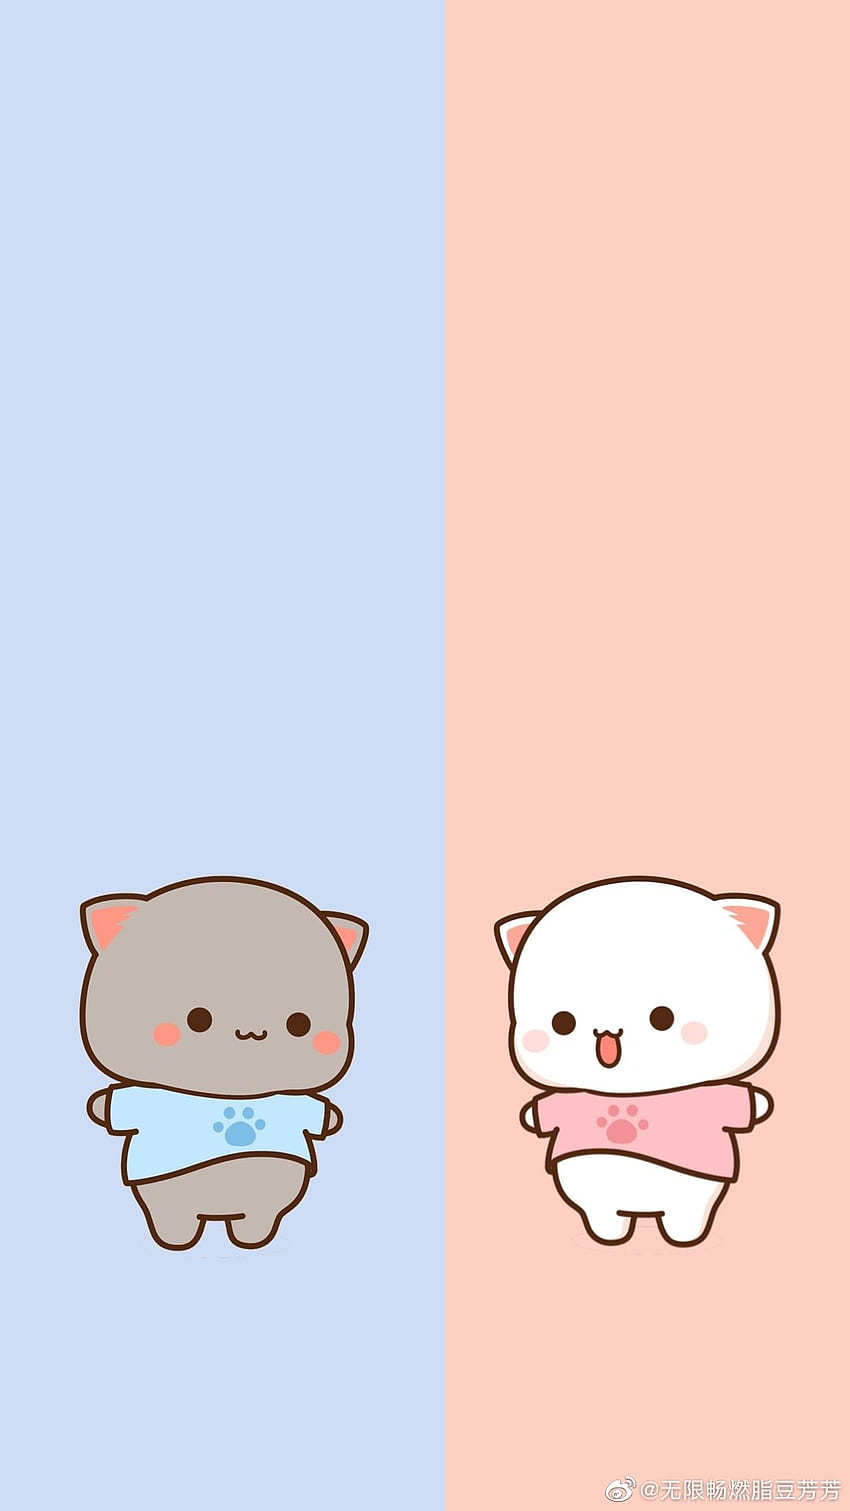 Cute Chibi Cat Wallpapers HD Android क लए APK डउनलड कर